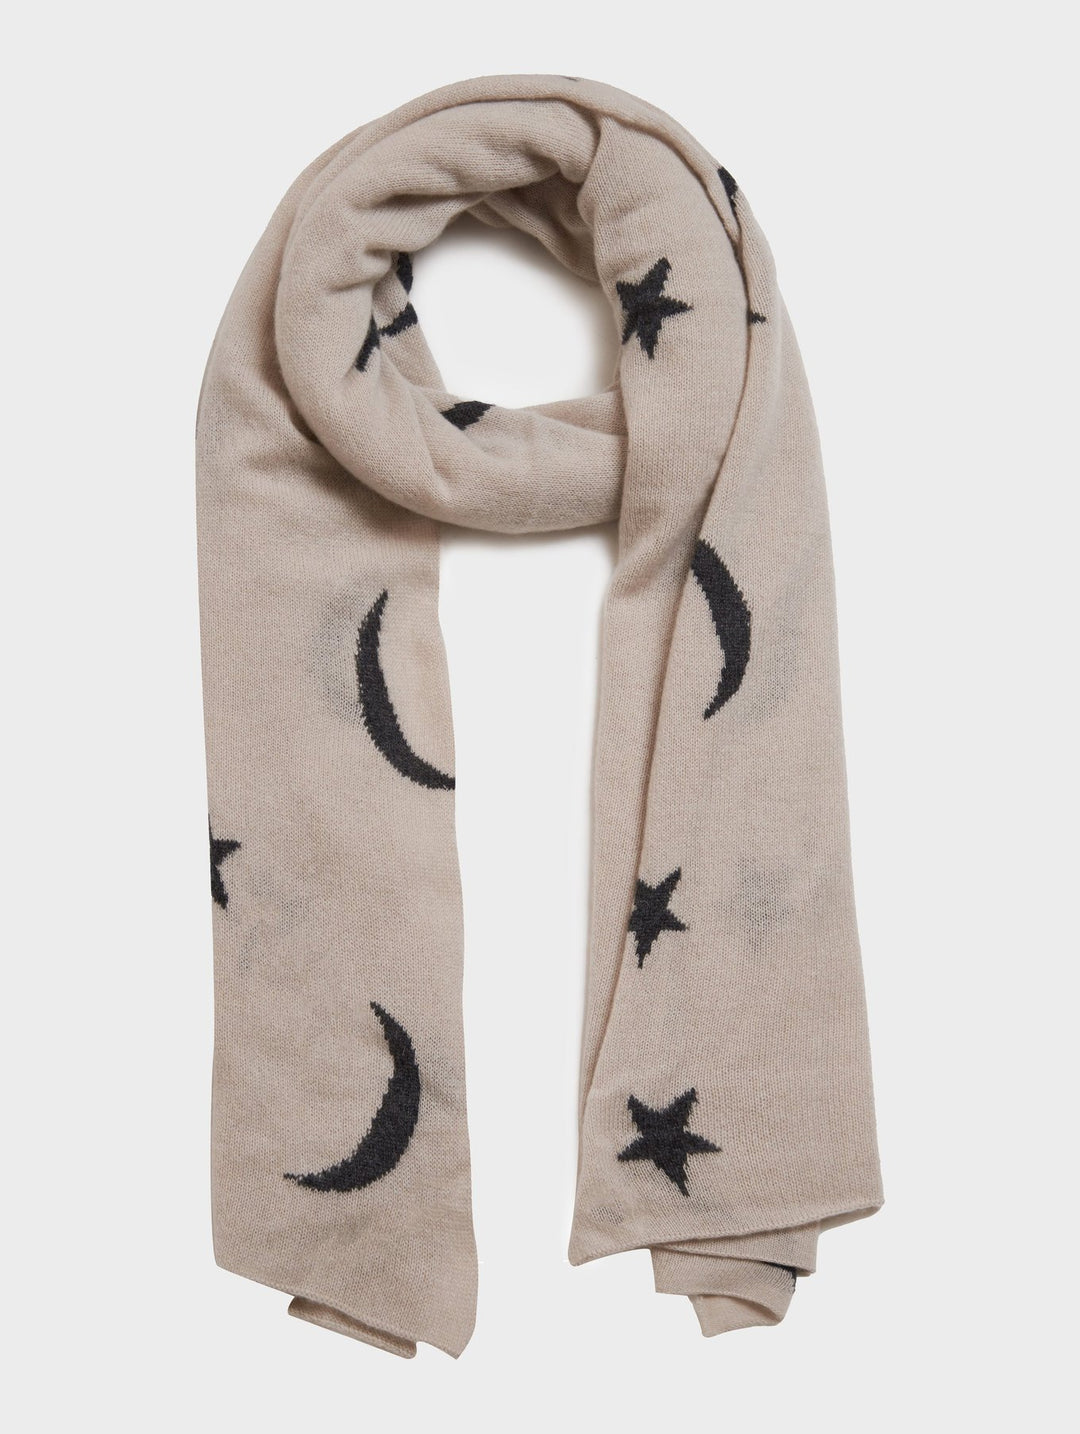 White + Warren - Cashmere New Moon Intarsia Scarf in Moonstone/Charcoal Heather